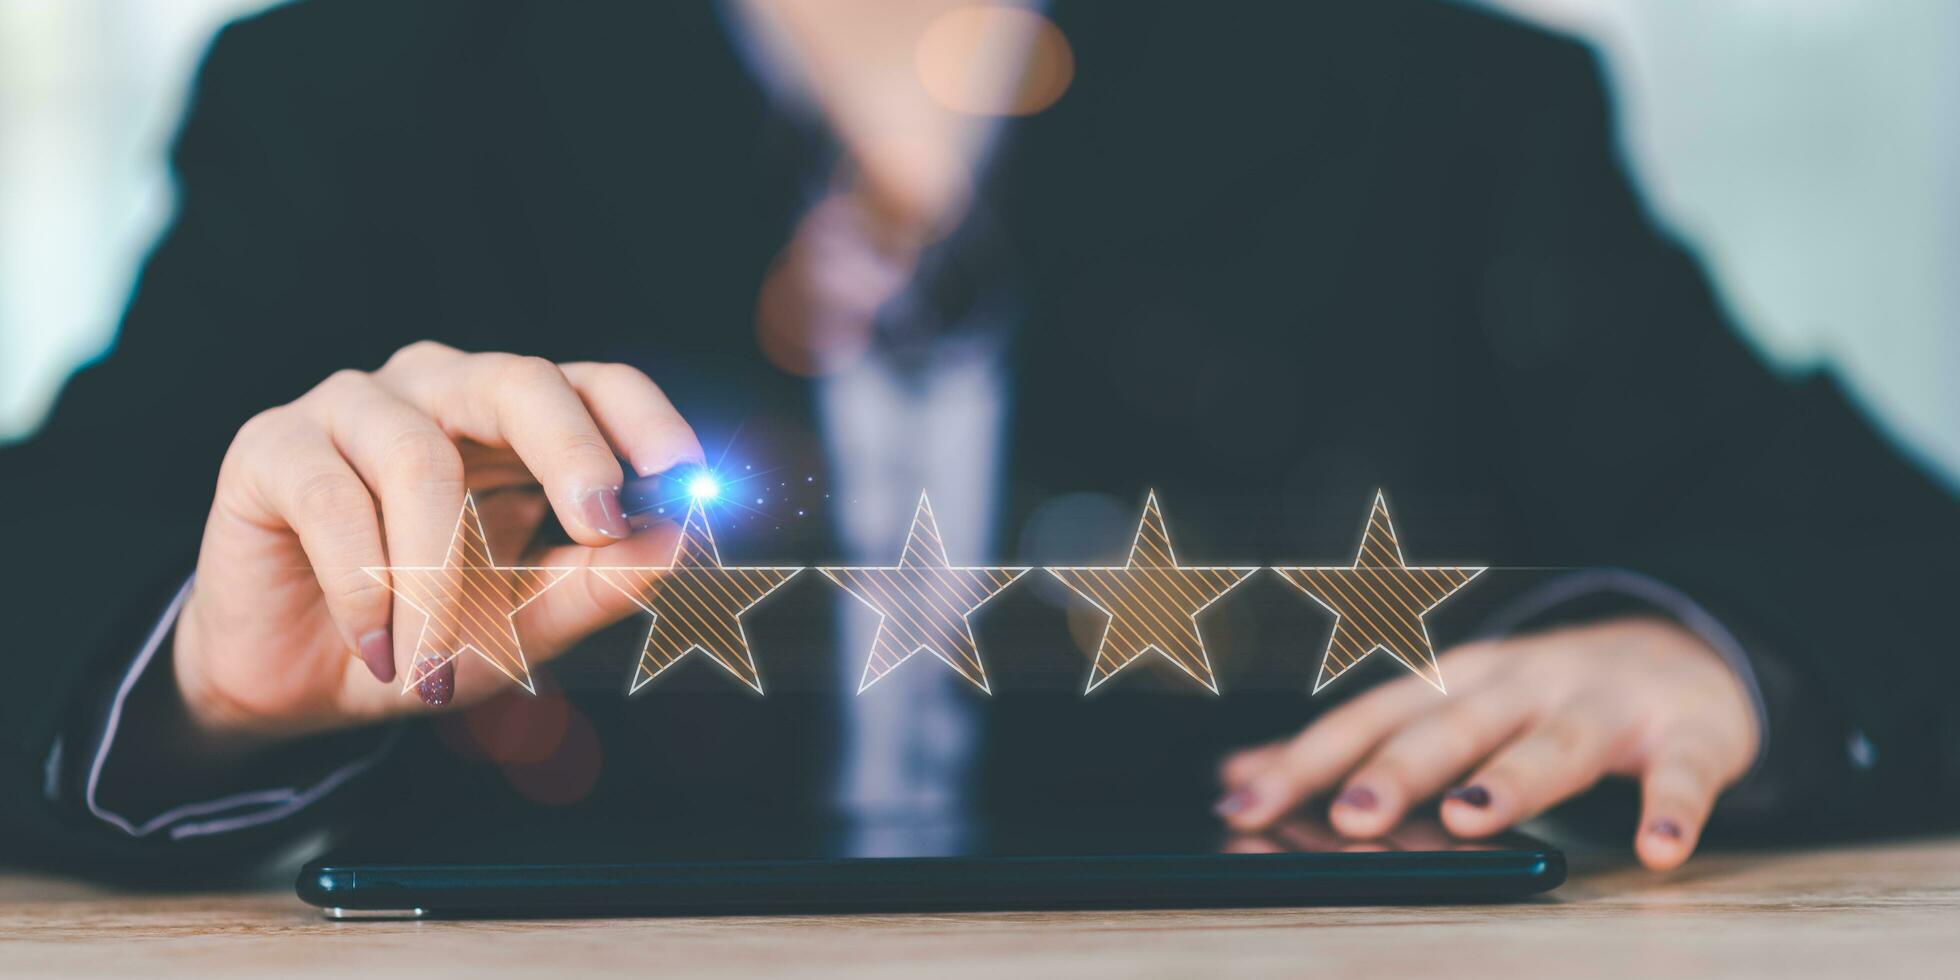 consumers opinion ,rated satisfaction ,Online review score ,Surveys and evaluations with excellent results ,Expressing confidence in service with  star symbol ,customer answer online business surveys photo